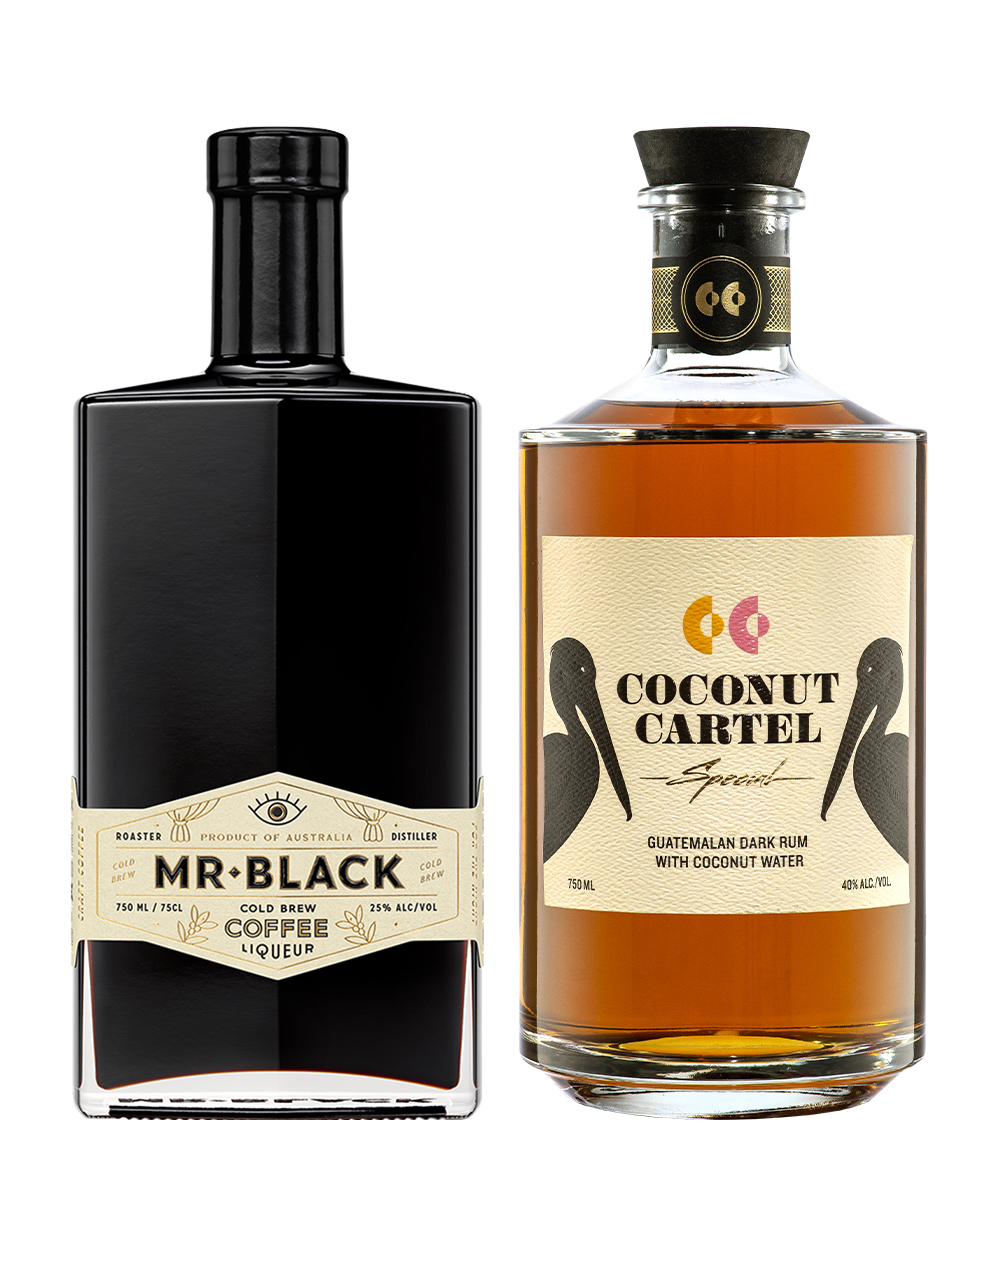 BUY] Remy Martin XO Excellence Cognac (RECOMMENDED) at Cask Cartel –